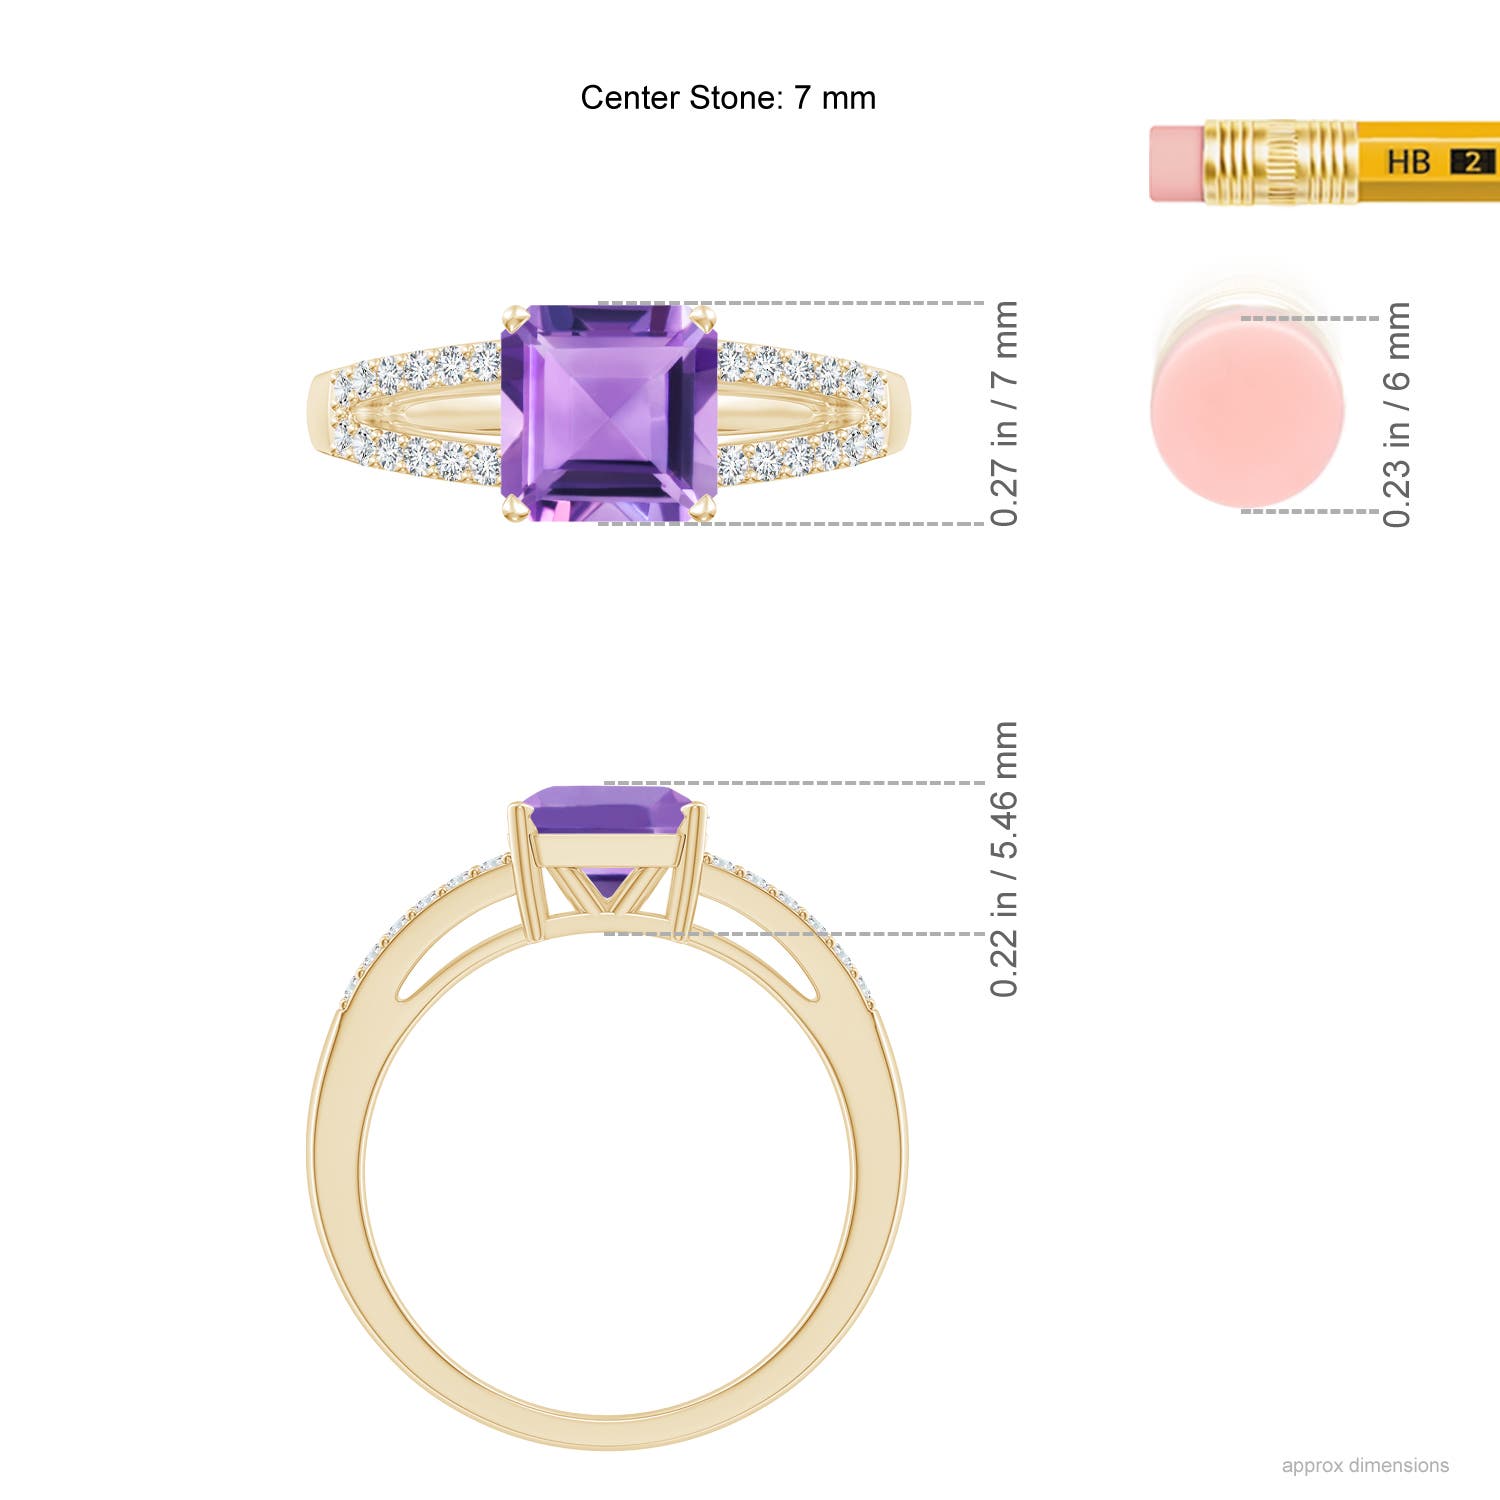 A - Amethyst / 1.54 CT / 14 KT Yellow Gold